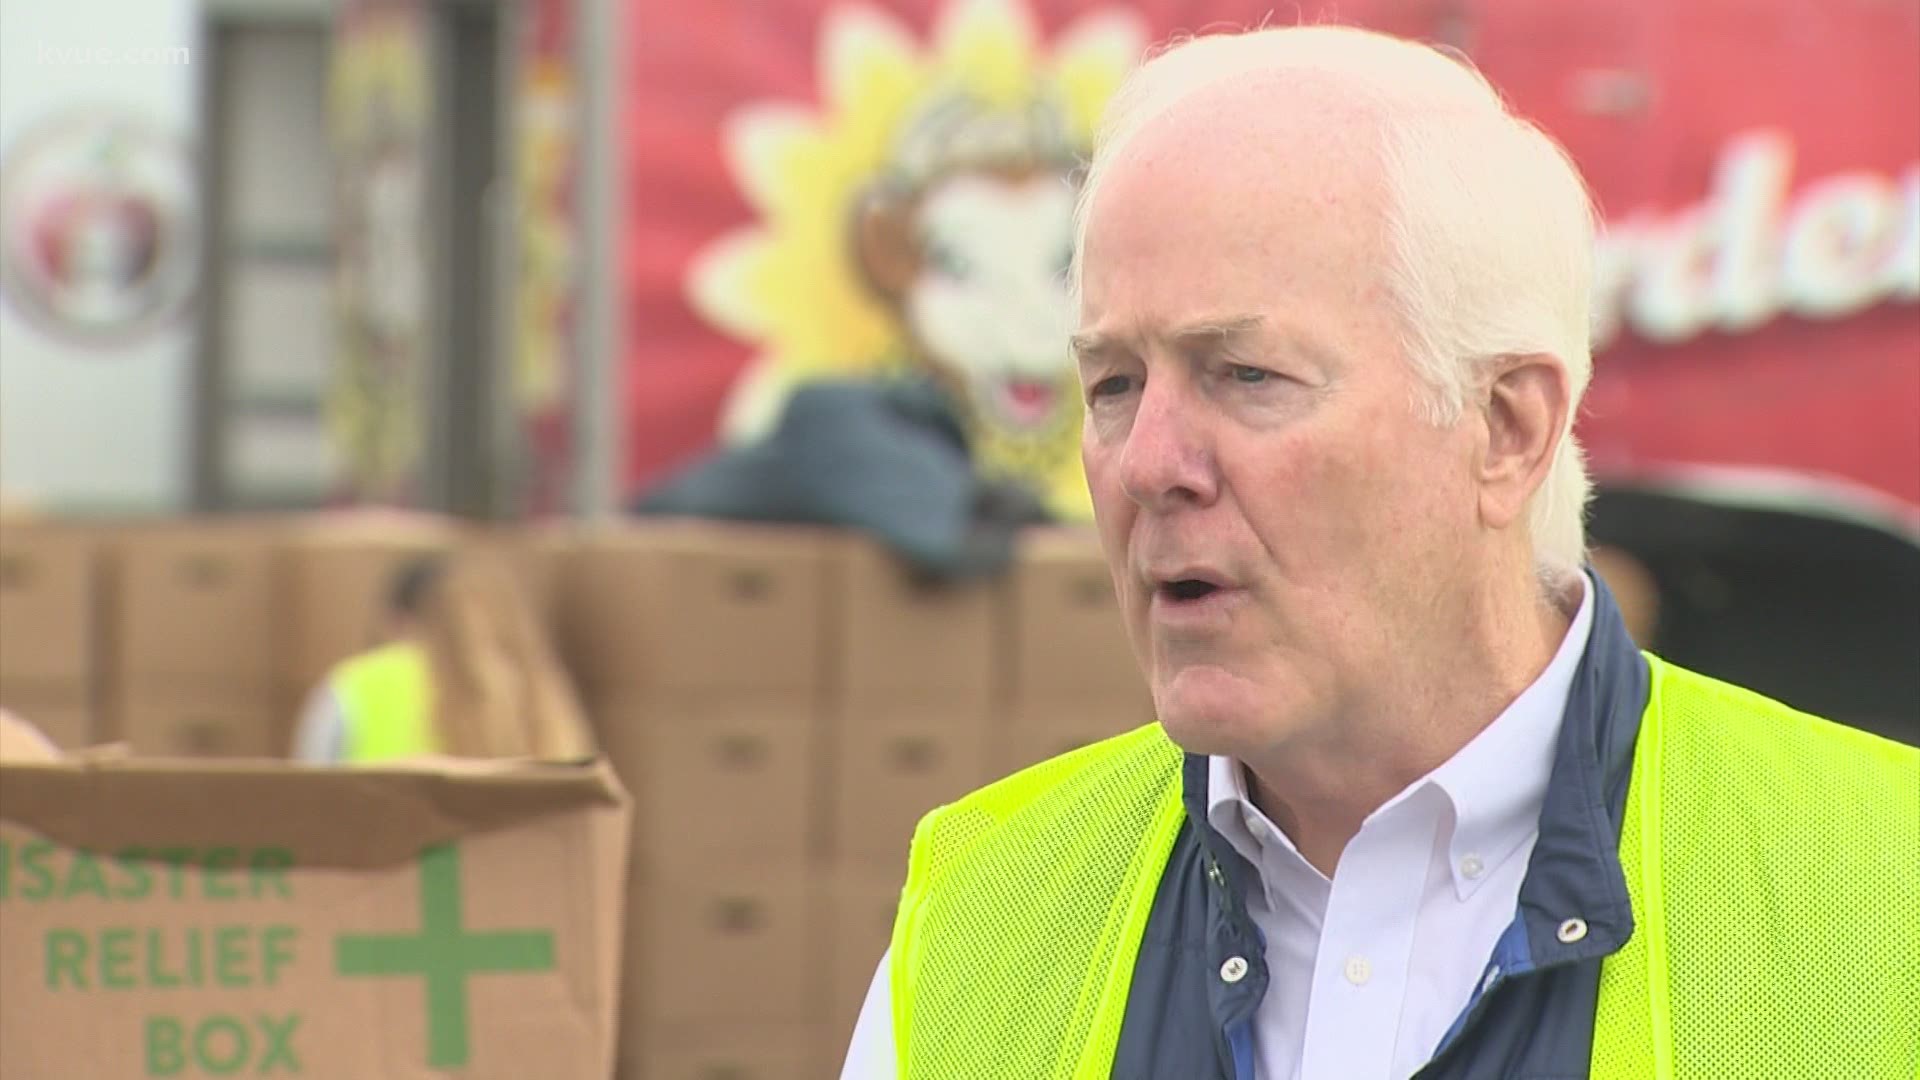 U.S. Sen. John Cornyn was in Austin to volunteer at the Central Texas Food Bank when he was asked about the current state of the presidential election results.